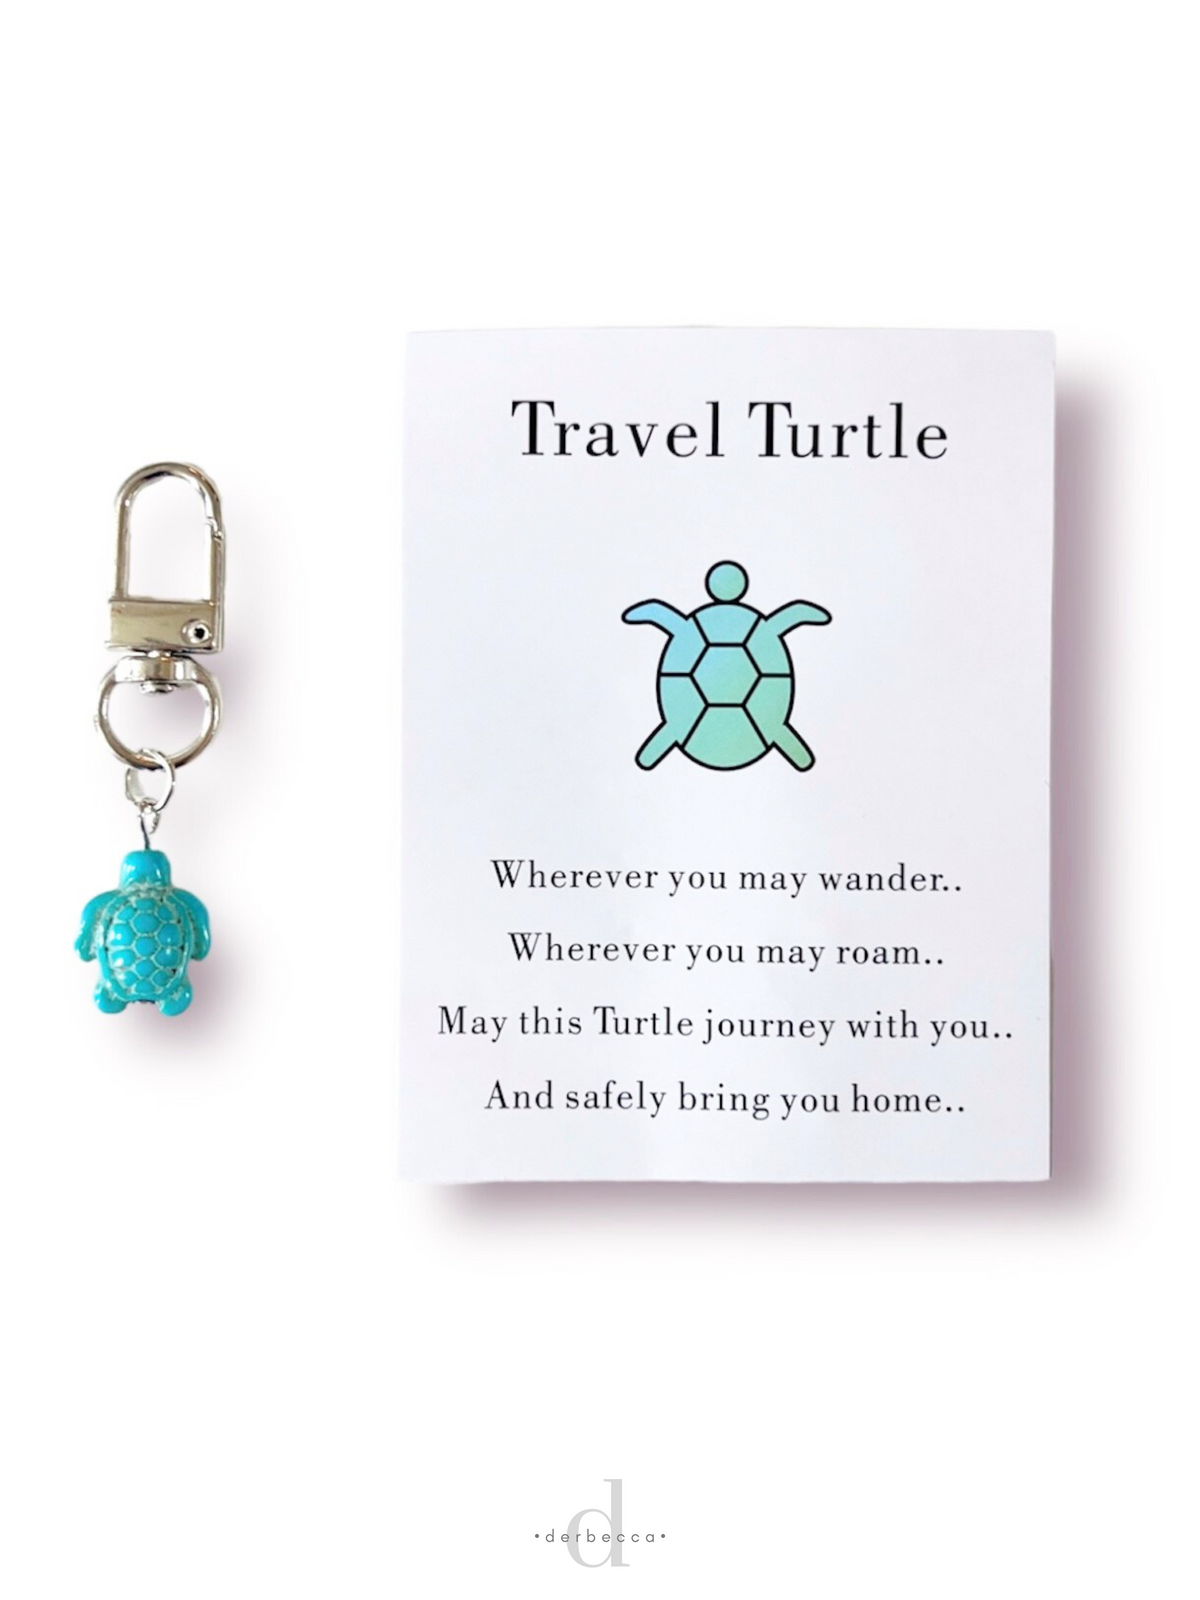 Travel Turtle Mini Keychain Bag Charm Zipper Pull Clip Charm Turquoise Turtle with Poem Saying Card included: Wherever you may wander.. Wherever you may roam.. May this Turtle journey with you.. And safely bring you home.